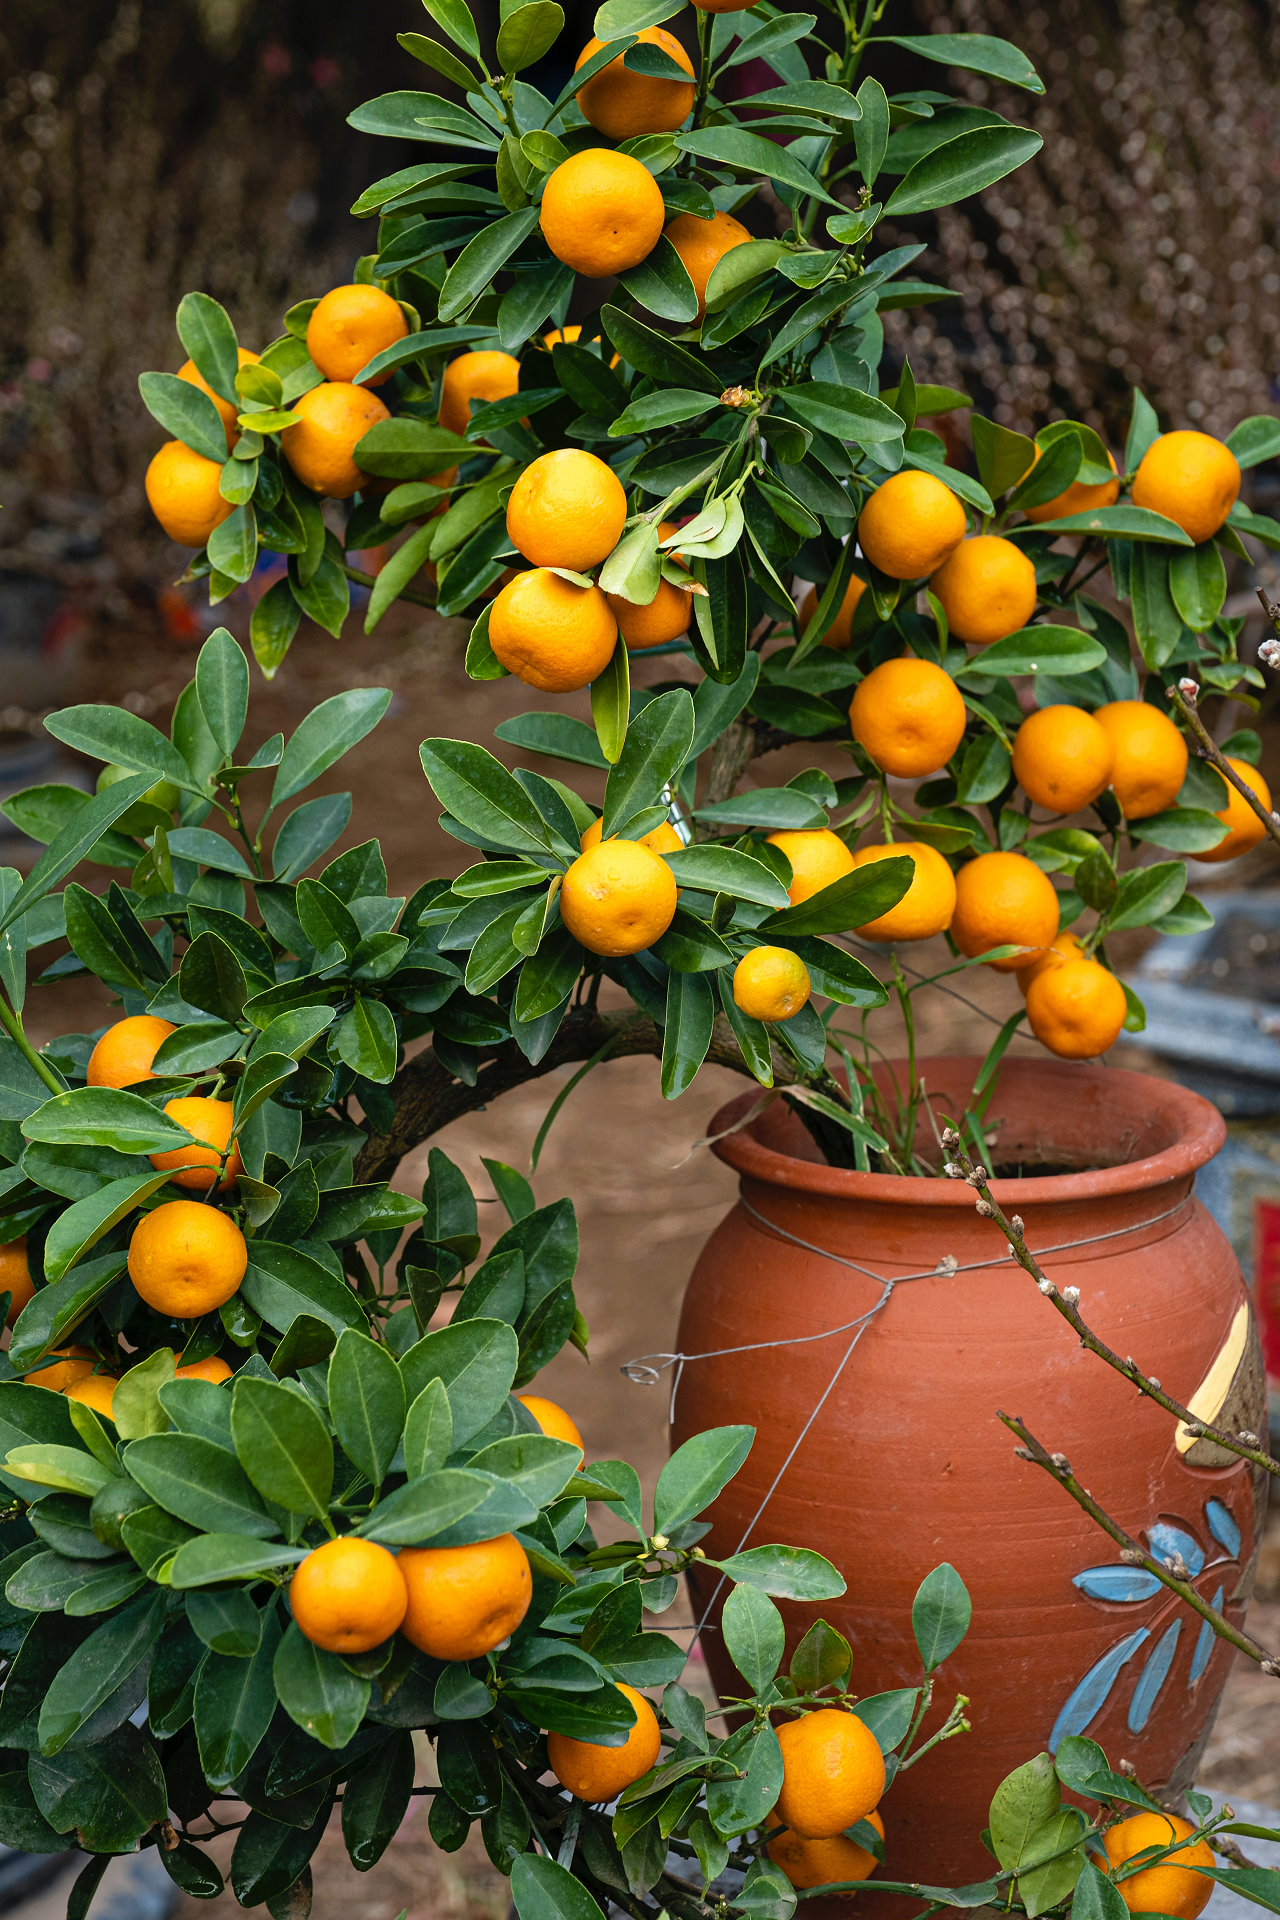 Image of a dwarf citrus tree growing in a container.